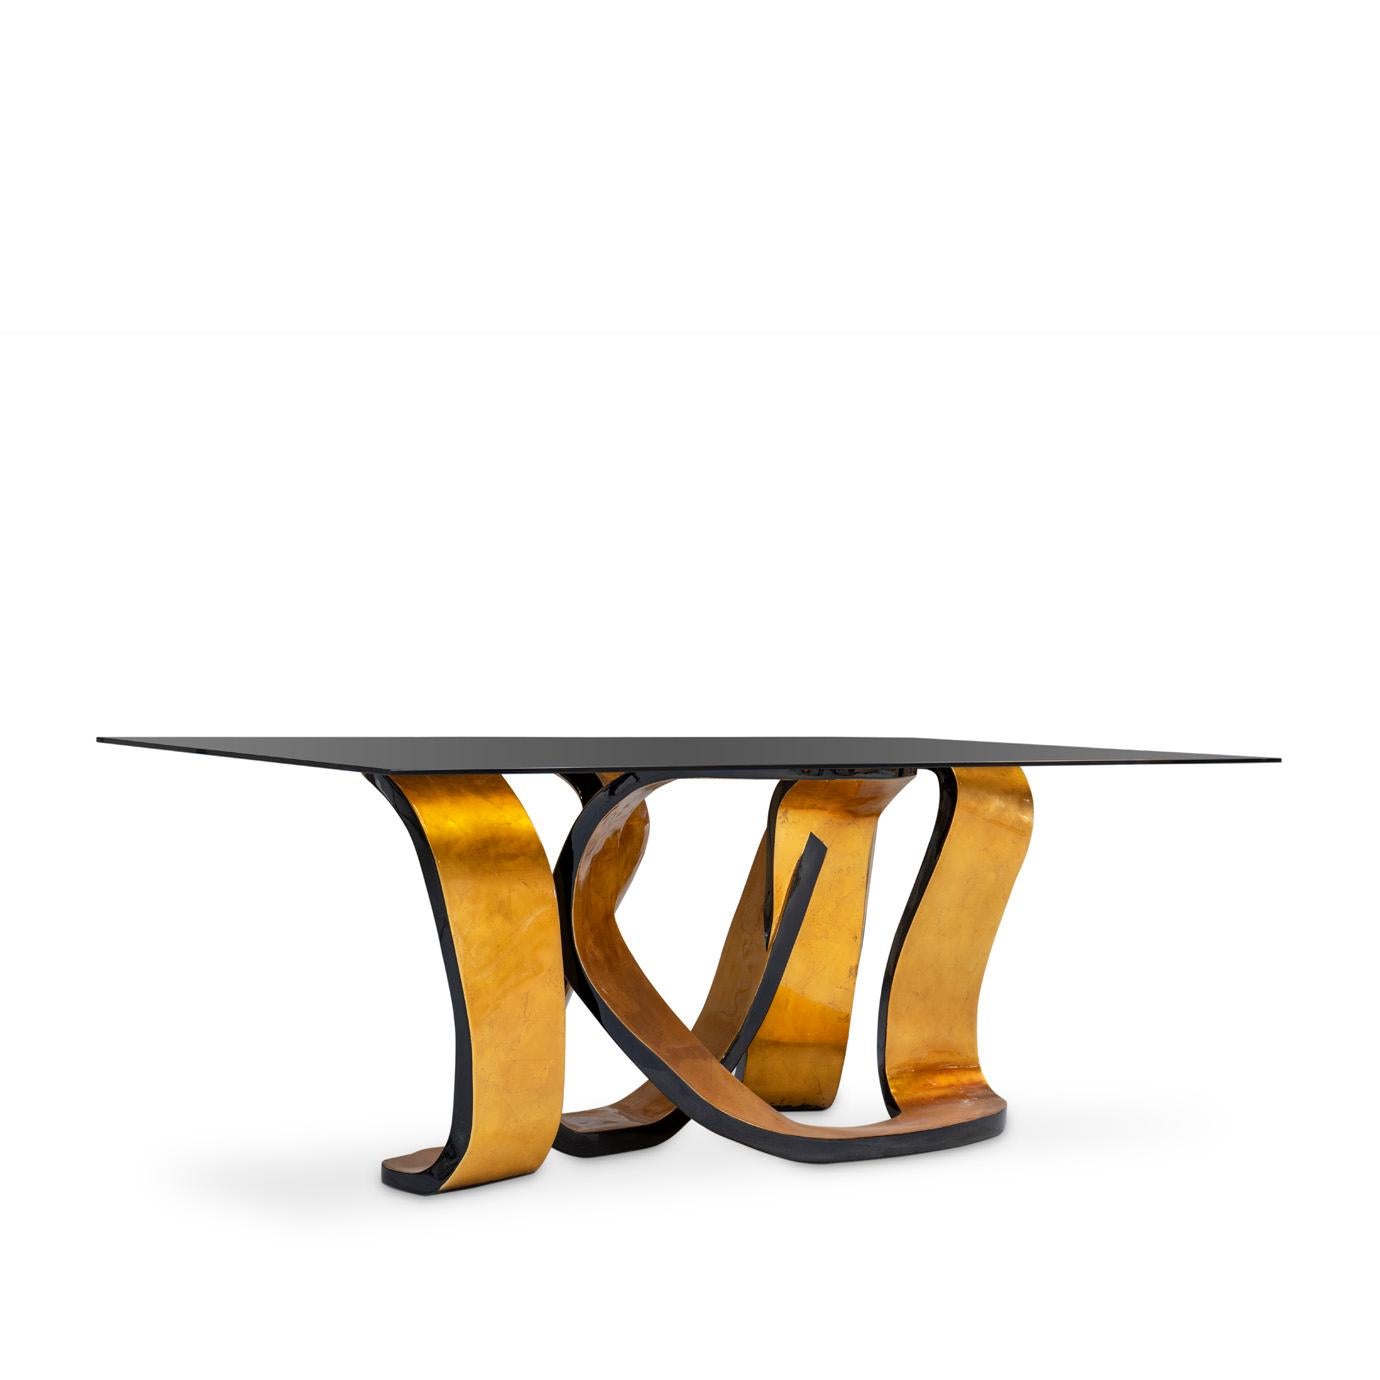 Get wrapped up in the rhythmic design of the Ribbon dining table. The provocative twists and turns of the base are delicately adorned in gleaming metalic leaf, mimicking the sheen of a girl's hair ribbon. The luxury dining table's playful base is